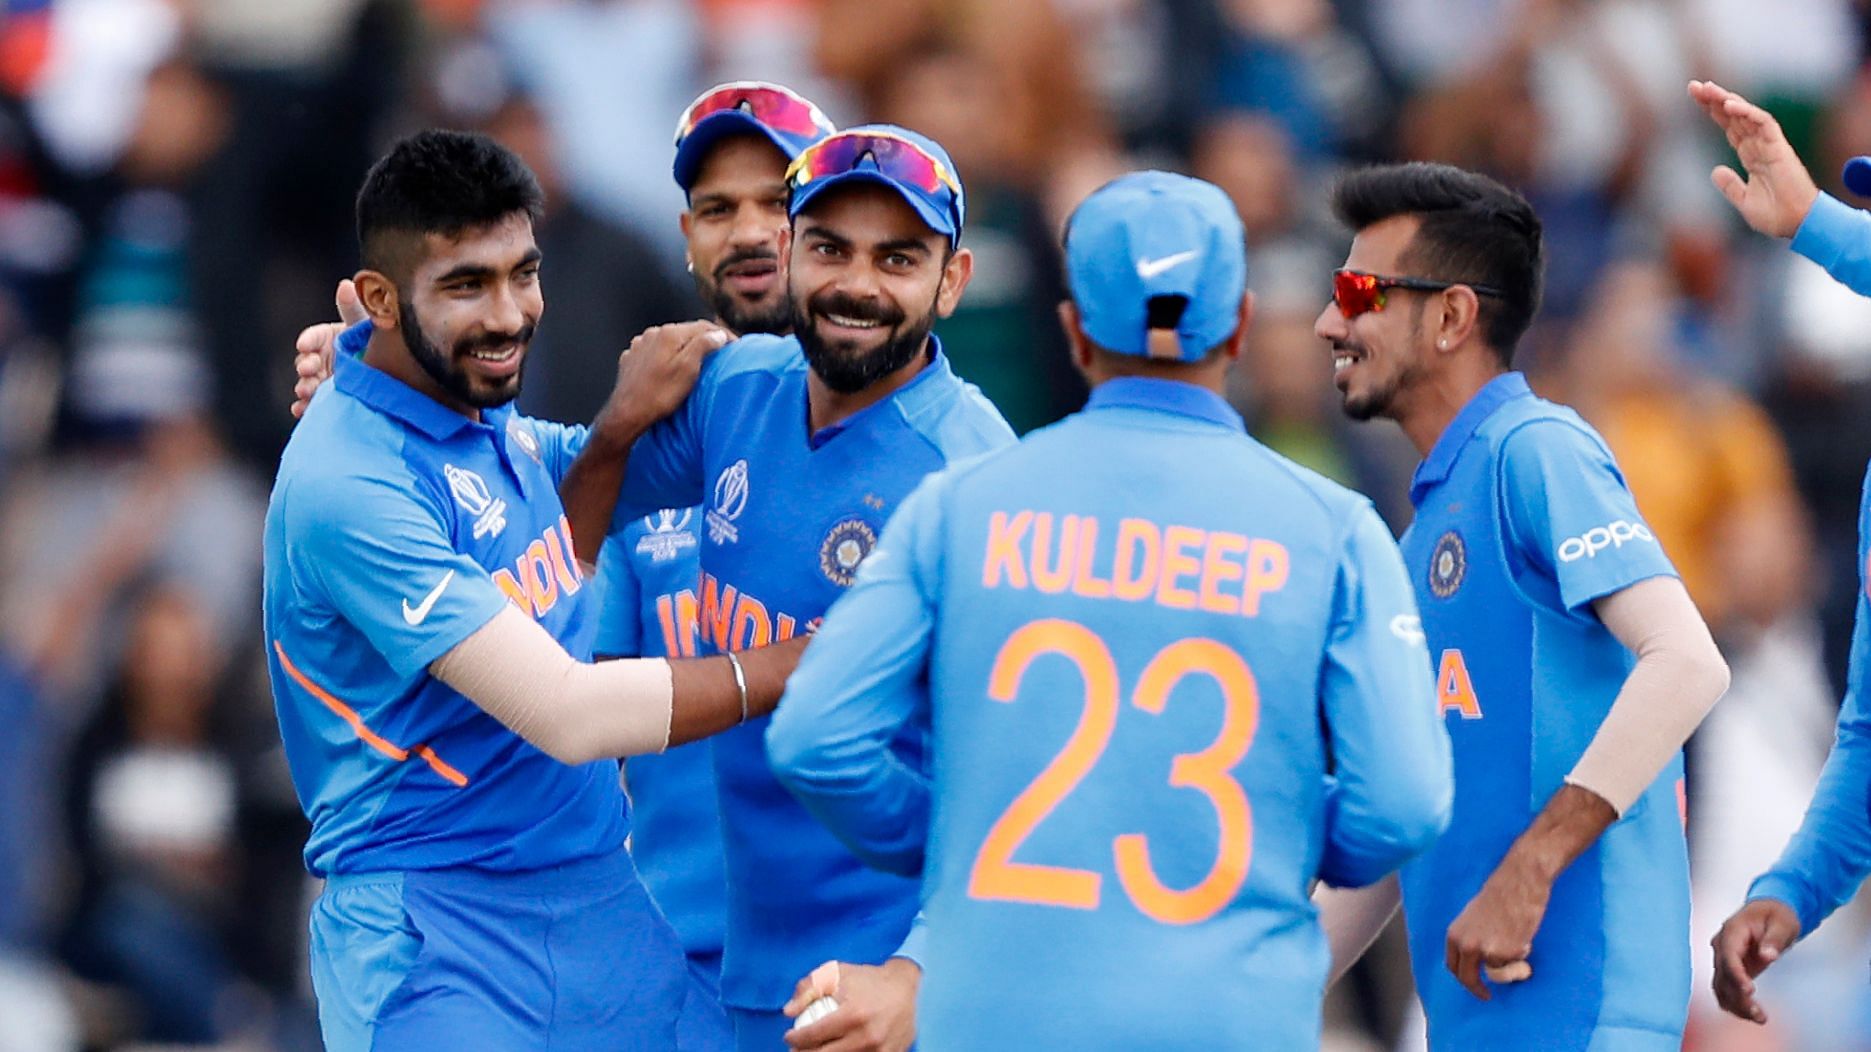 Watch highlights: India beat South Africa by 6 wickets in their 2019 ICC World Cup opener.